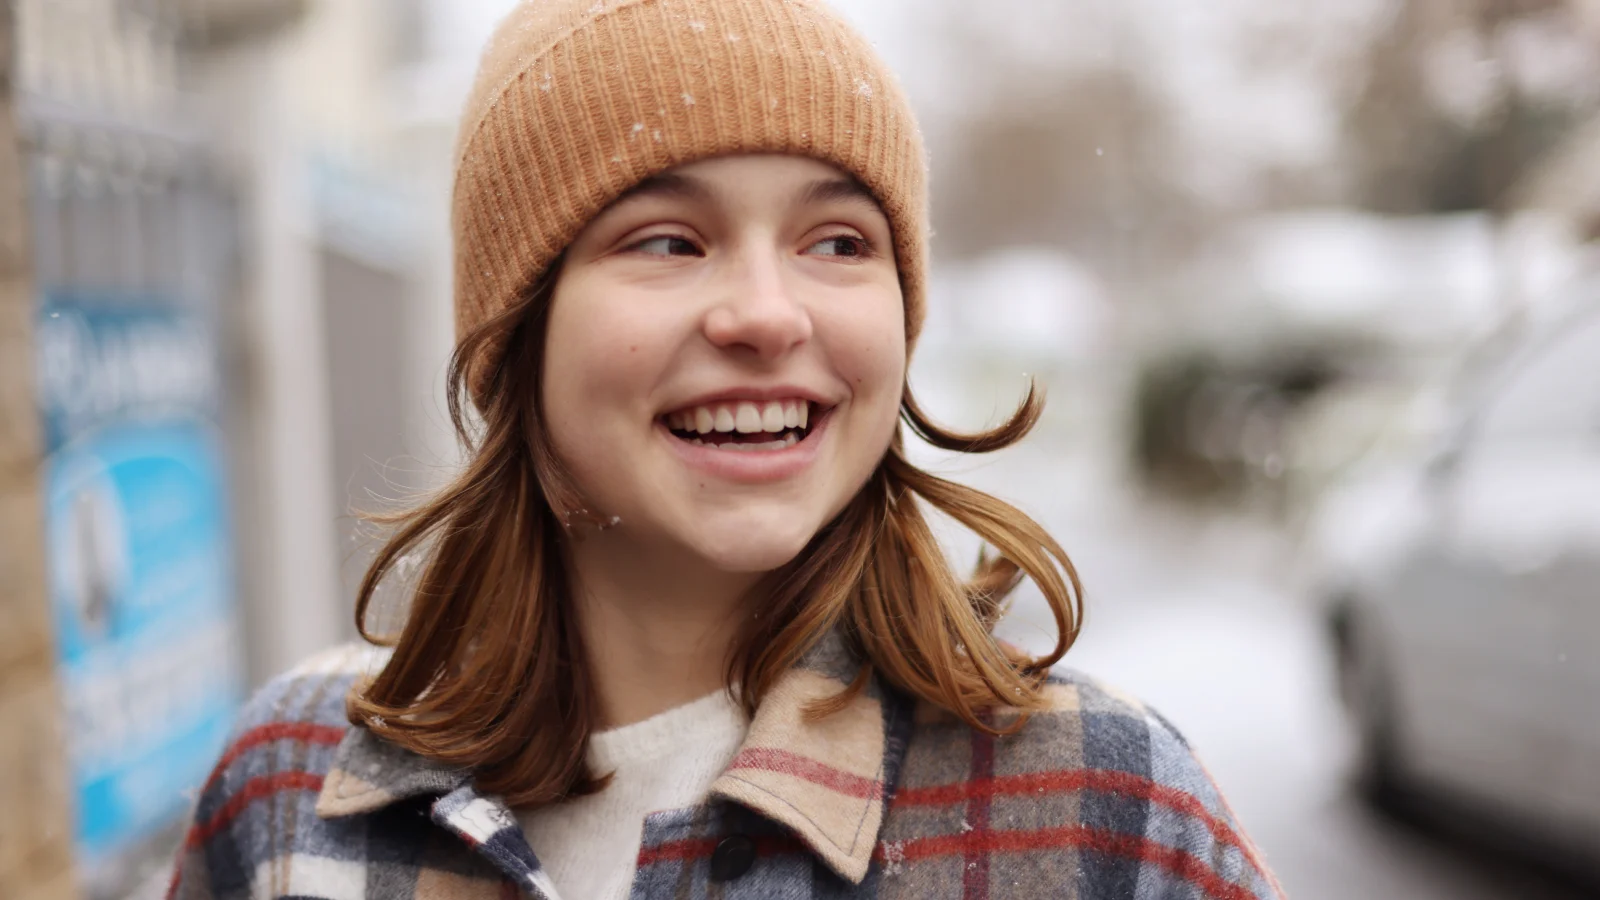 Girl smiling wearing a beanie